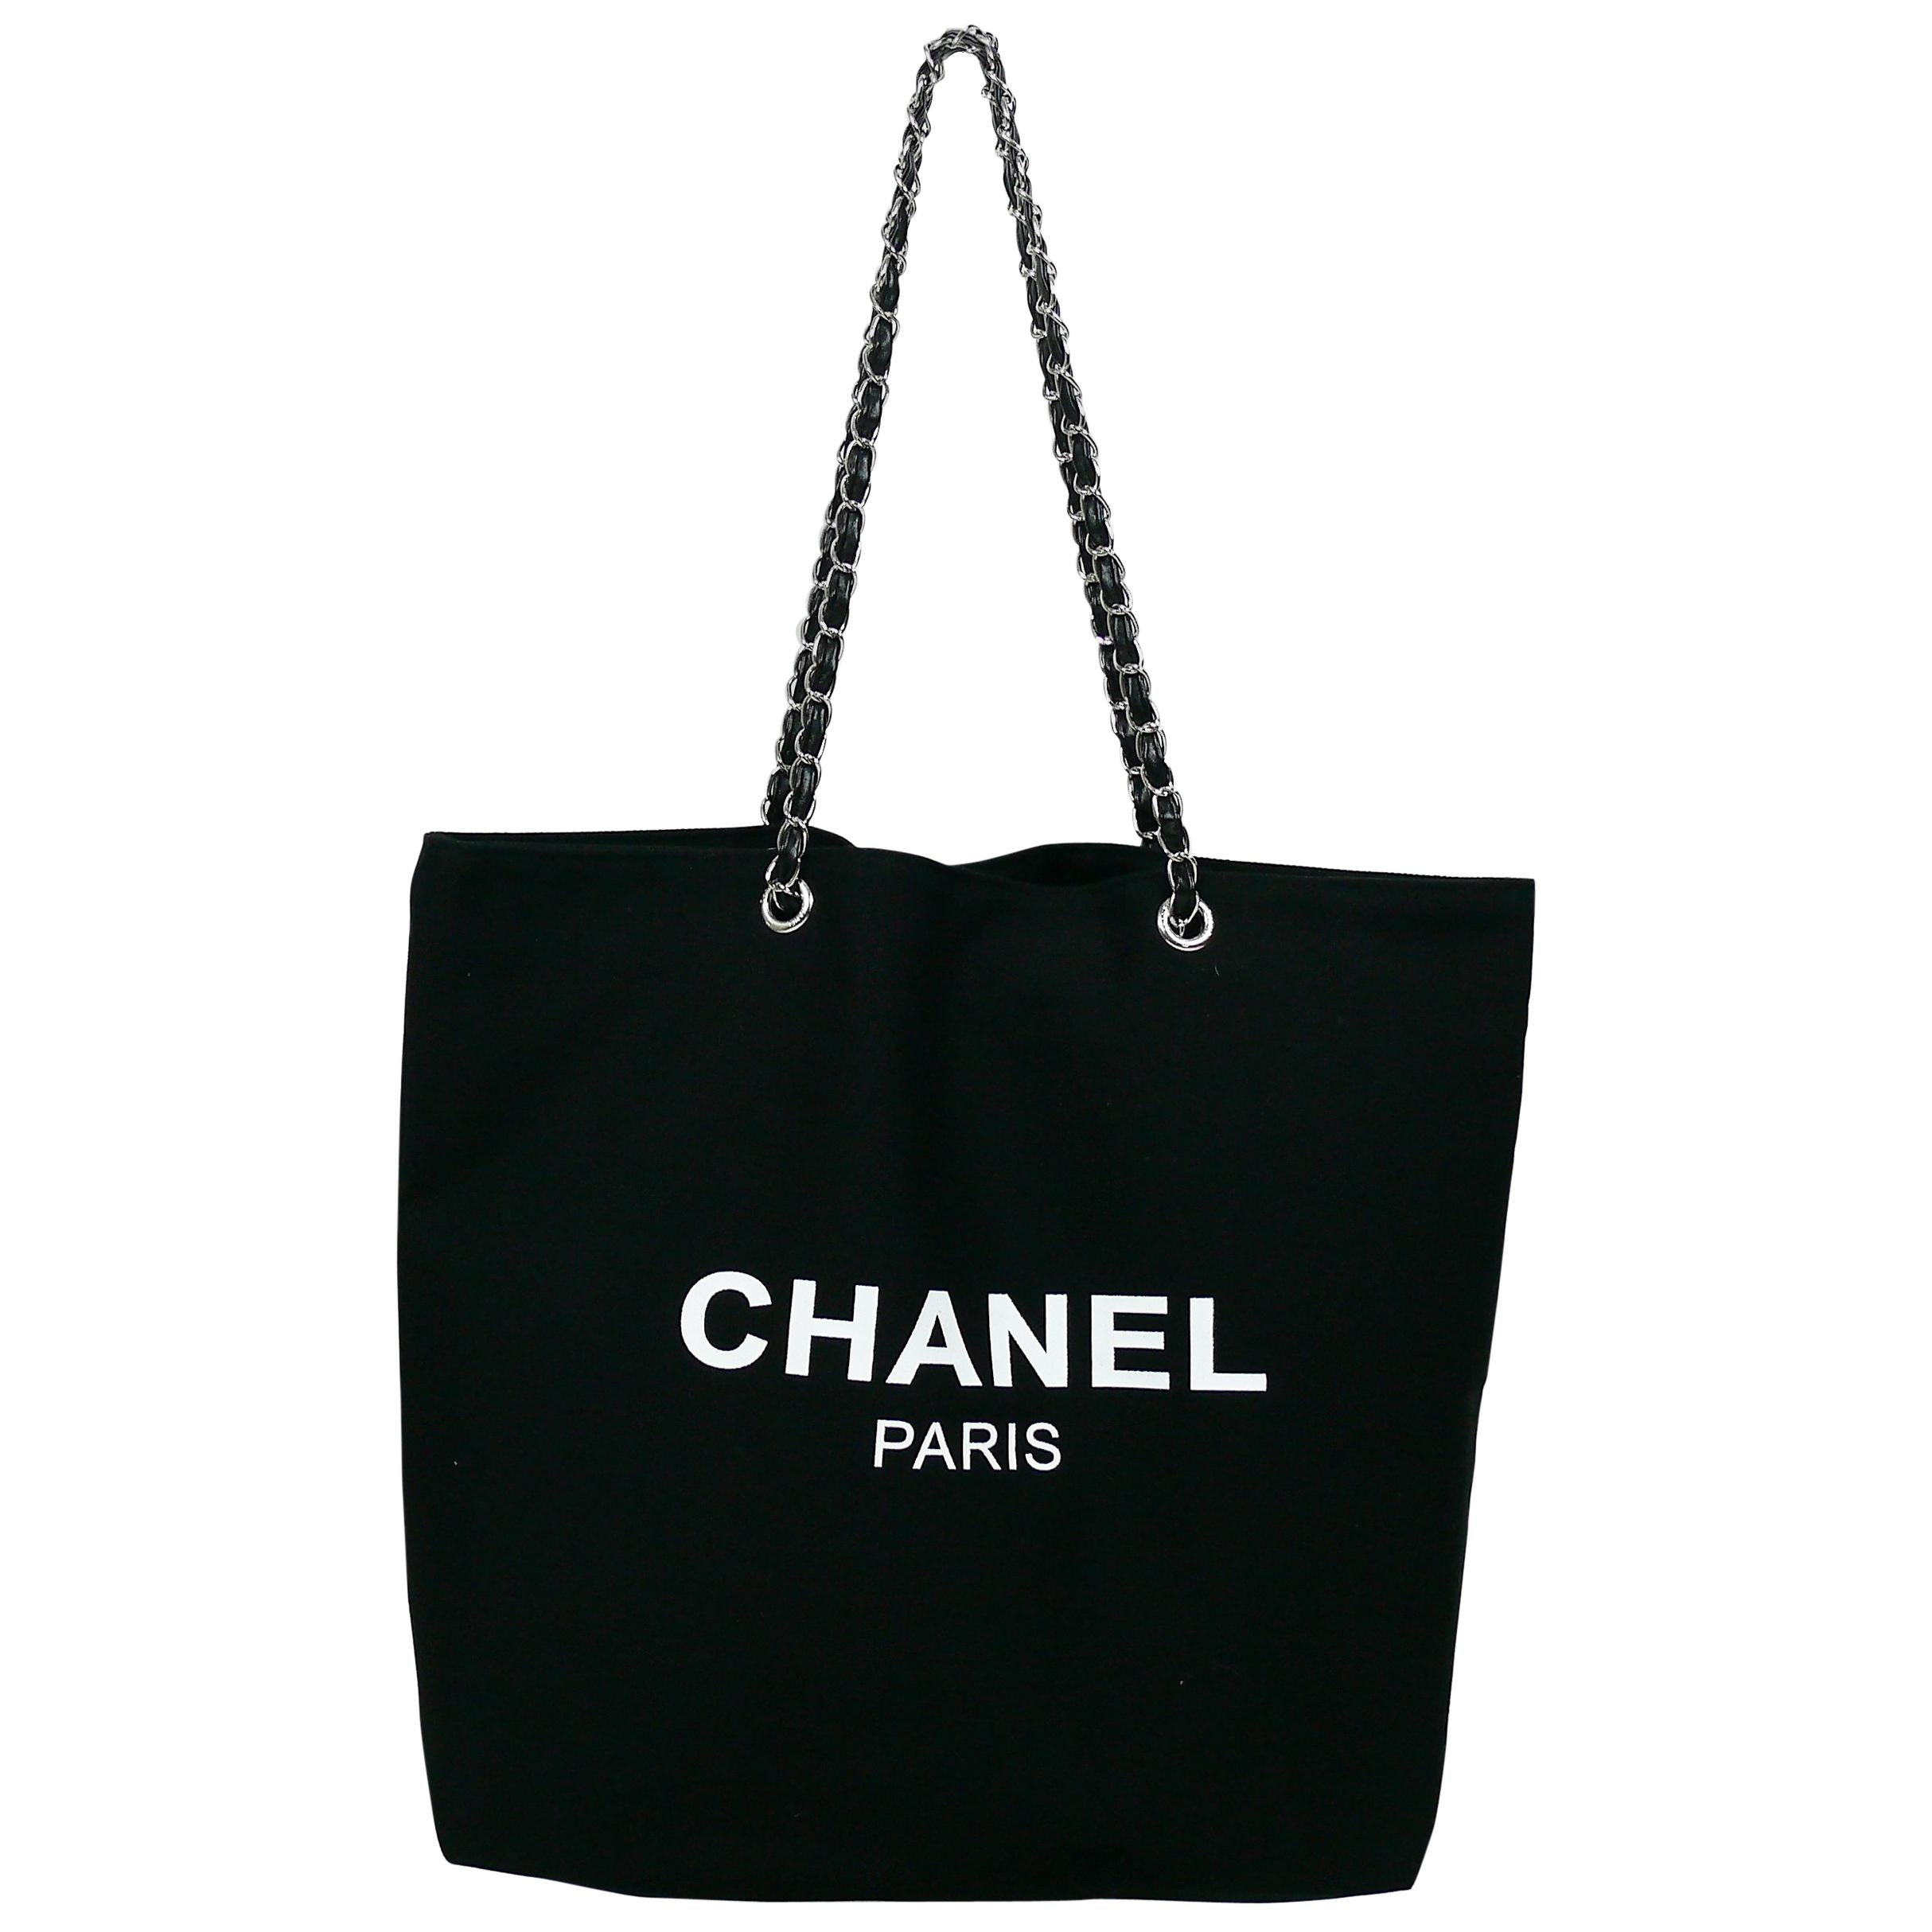 Chanel Black Canvas Tote Shopping Promotional Gift Bag